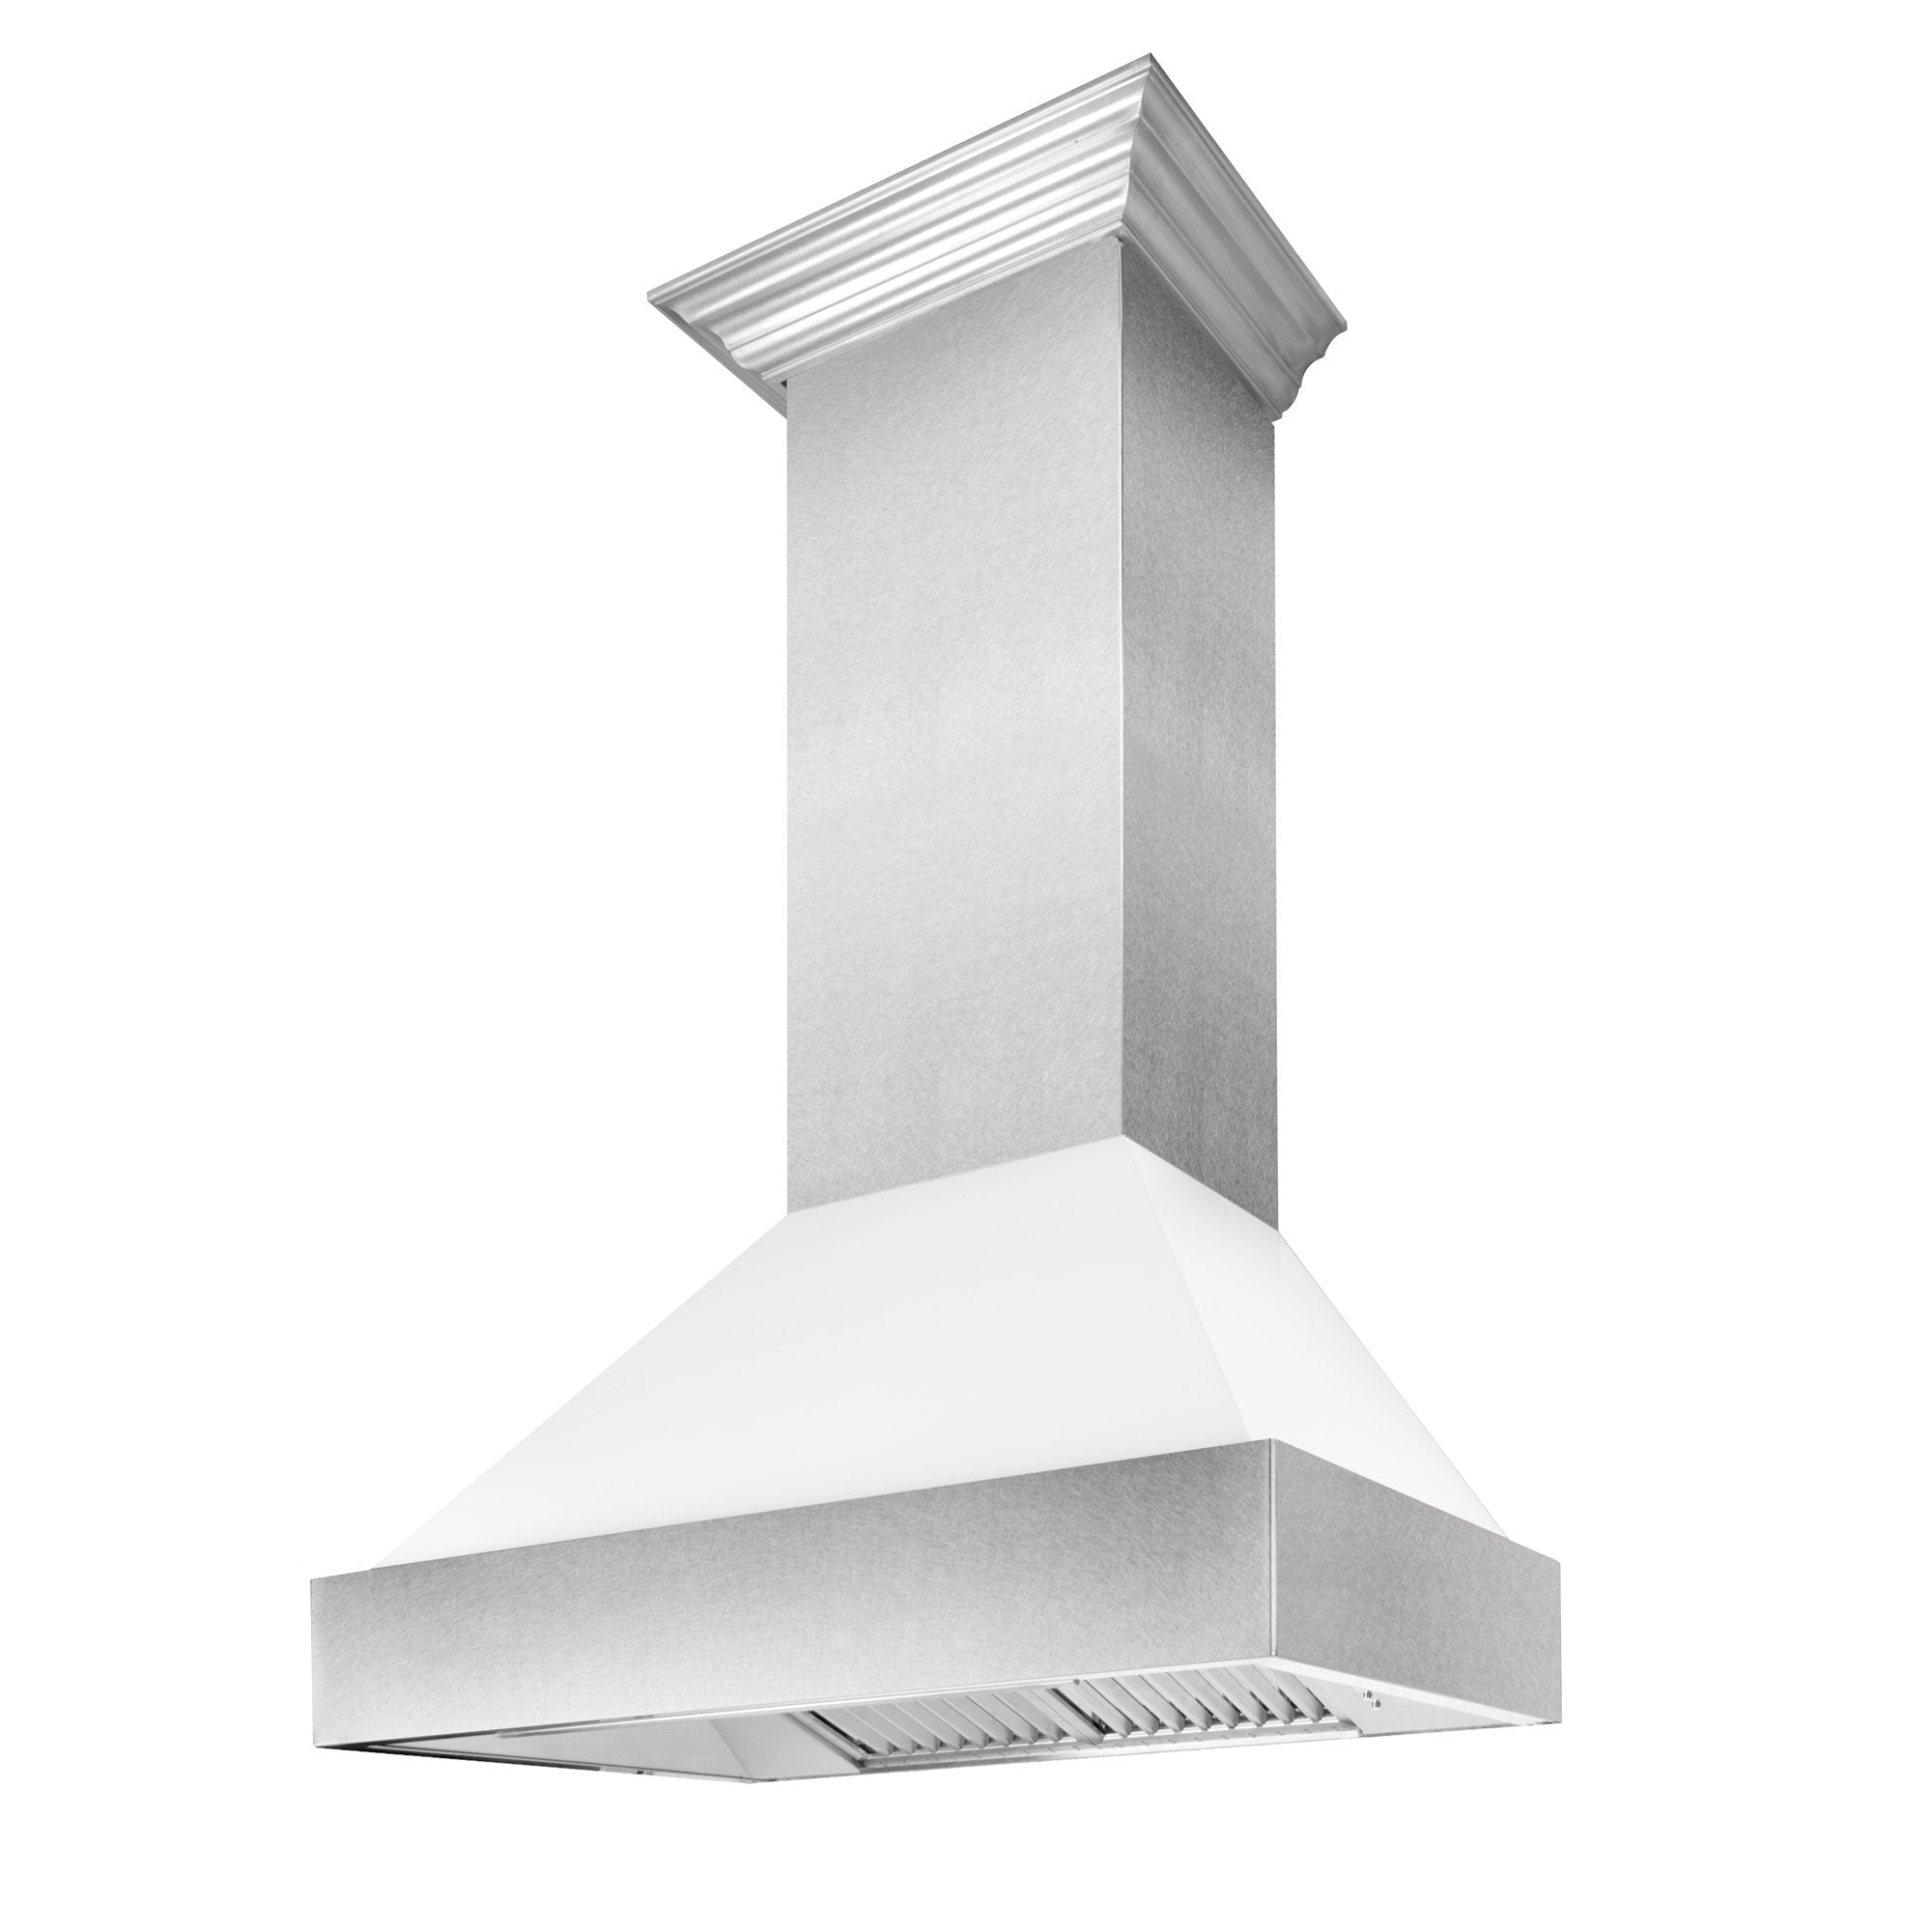 ZLINE 36 in. Kitchen Package with DuraSnow® Stainless Steel Dual Fuel Range with White Matte Door and Convertible Vent Range Hood (2KP-RASWMRH36)